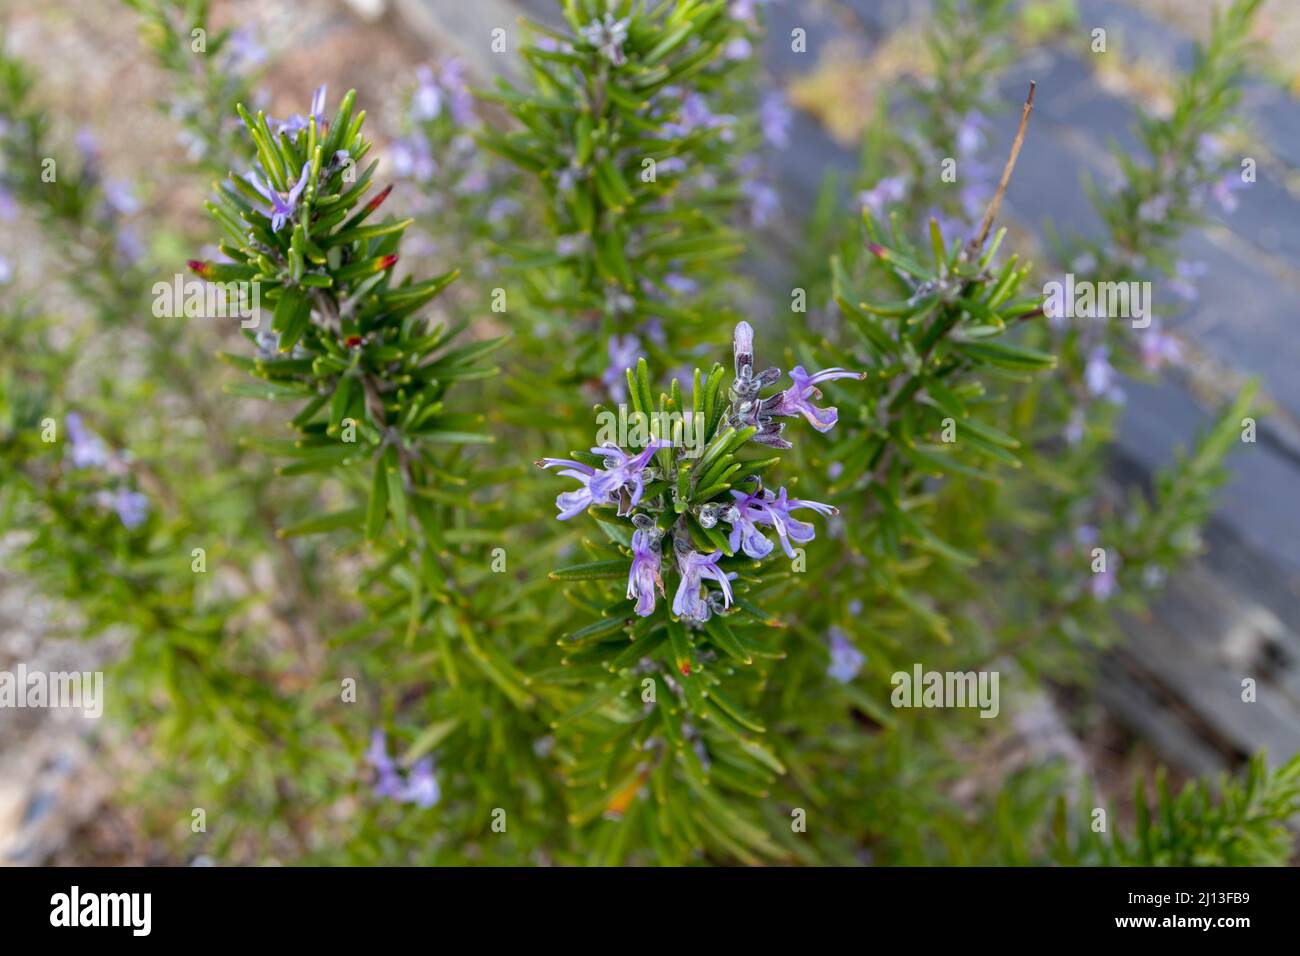 Rosemary branches with leaves and blue flowers. Salvia rosmarinus plant Stock Photo